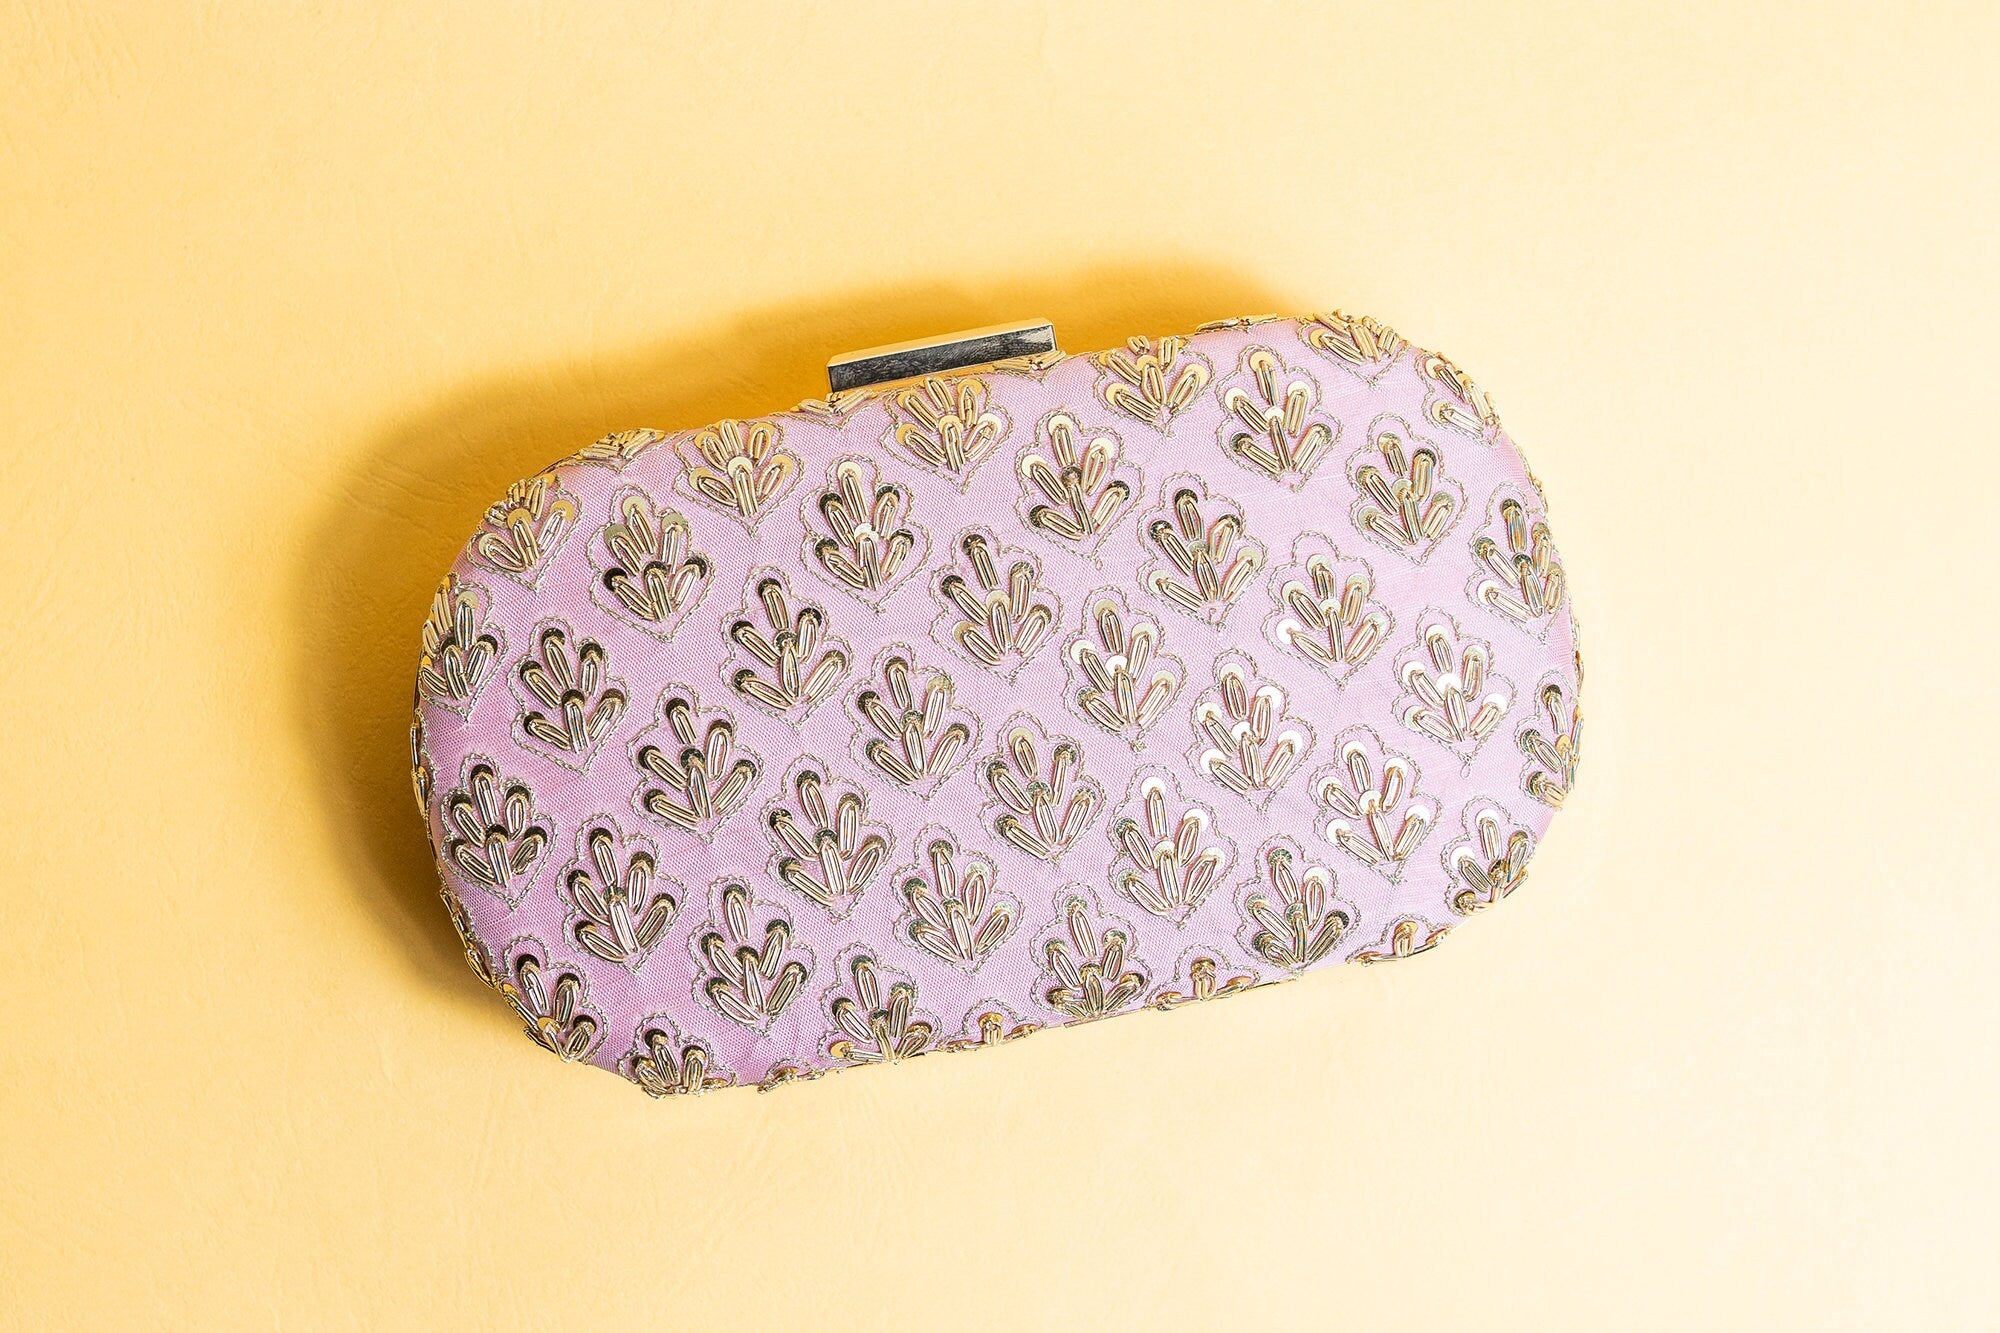 Pink metal embroidery clutch bag with detachable sling